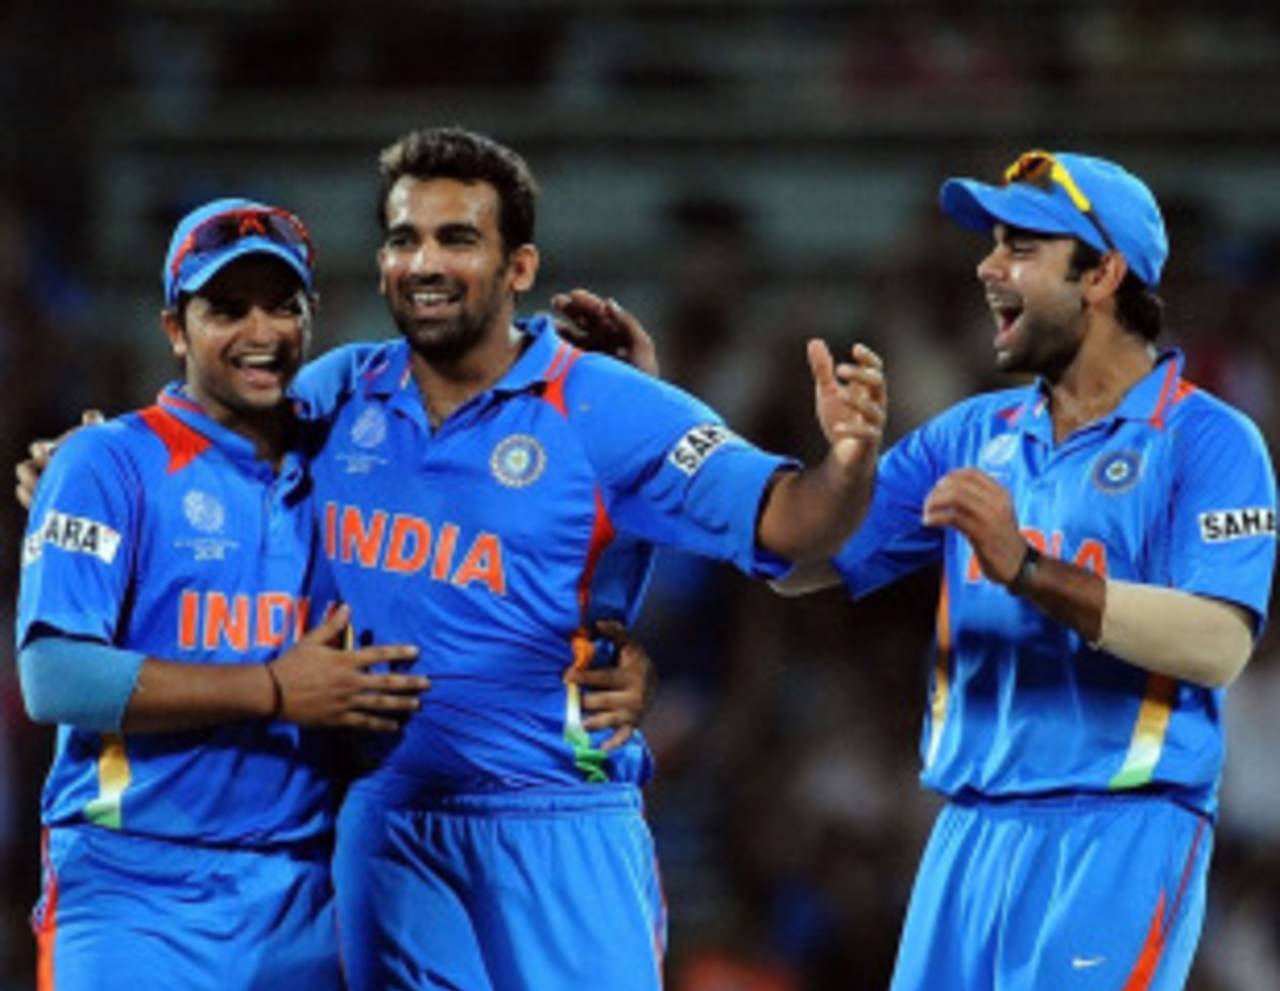 Zaheer Khan is congratulated on dismissing Devon Smith, India v West Indies, Group B, World Cup 2011, March 20, 2011